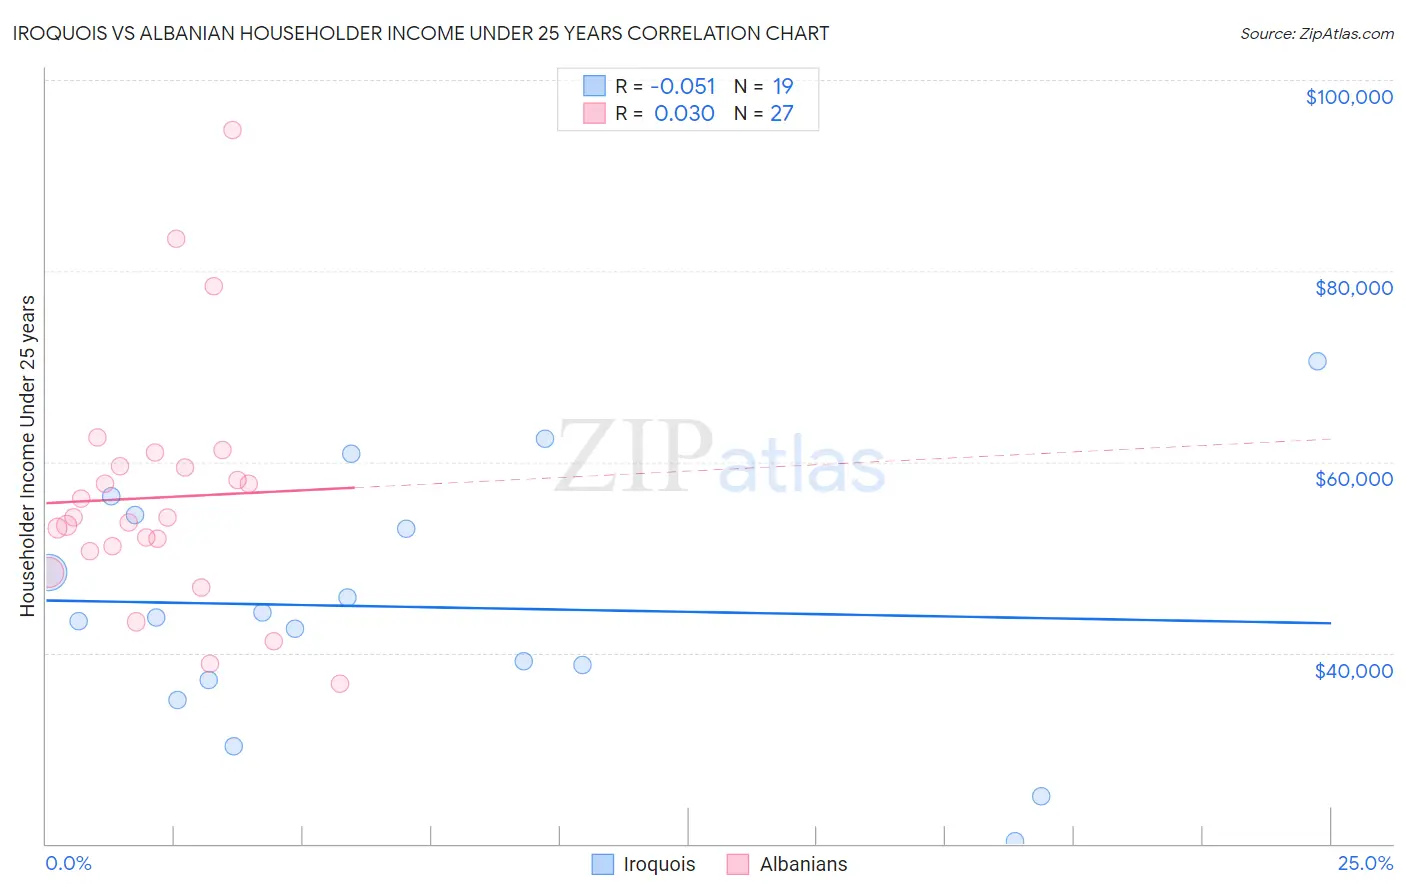 Iroquois vs Albanian Householder Income Under 25 years